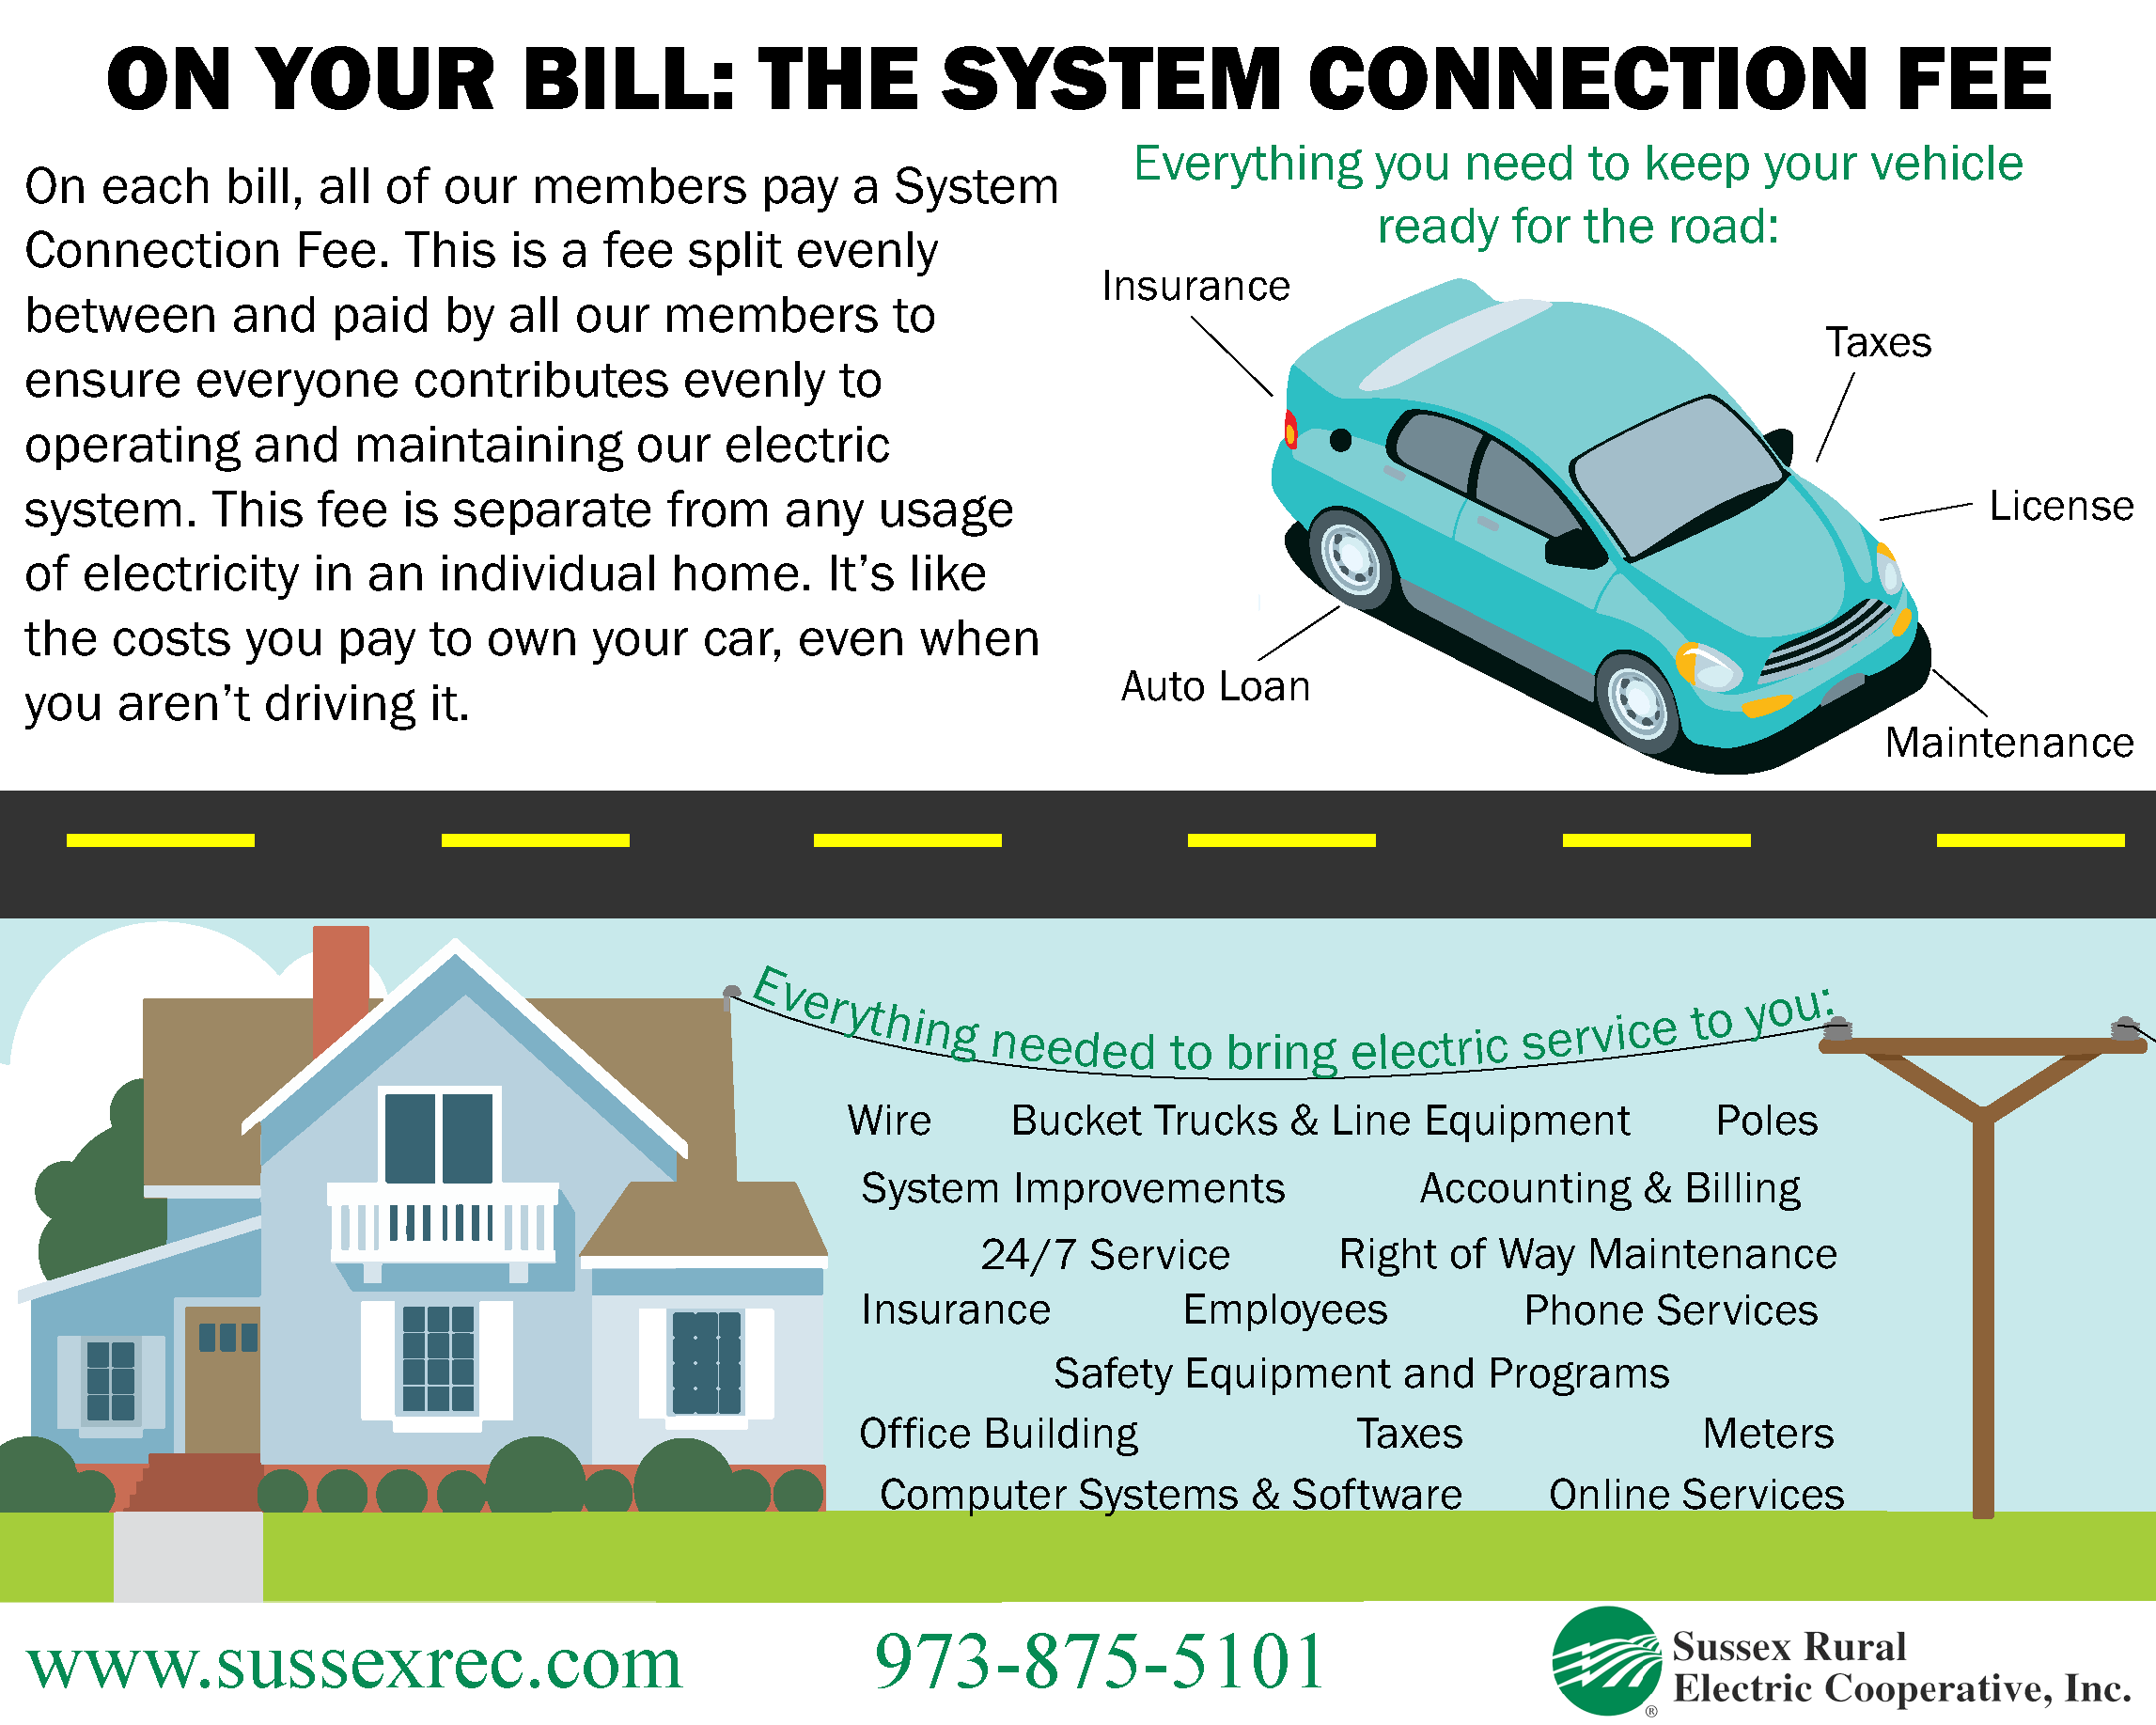 "ON YOUR BILL: THE SYSTEM CONNECTION FEE | On each bill, all of our members pay a System Connection Fee. This is a fee split evenly between and paid by all our members to ensure everyone contributes evenly to operating and mantaining our electric system. This fee is separate from any usage of electricity in an individual home. It's like the costs you pay to own your car, even when you aren't driving it. (Everything you need to keep your vehicle ready for the road: Insurance, Auto Loan, Taxes, License, Maintenance.) Everything needed to bring electric service to you: Wire, Bucket Trucks & Line Equipment, Poles, System Improvements, Accounting & Billing, 24/7 Service, Right of Way Maintenance, Insurance, Employees, Phone Services, Safety Equipment and Programs, Office Building, Taxes, Meters, Computer Systems & Software, Online Services.